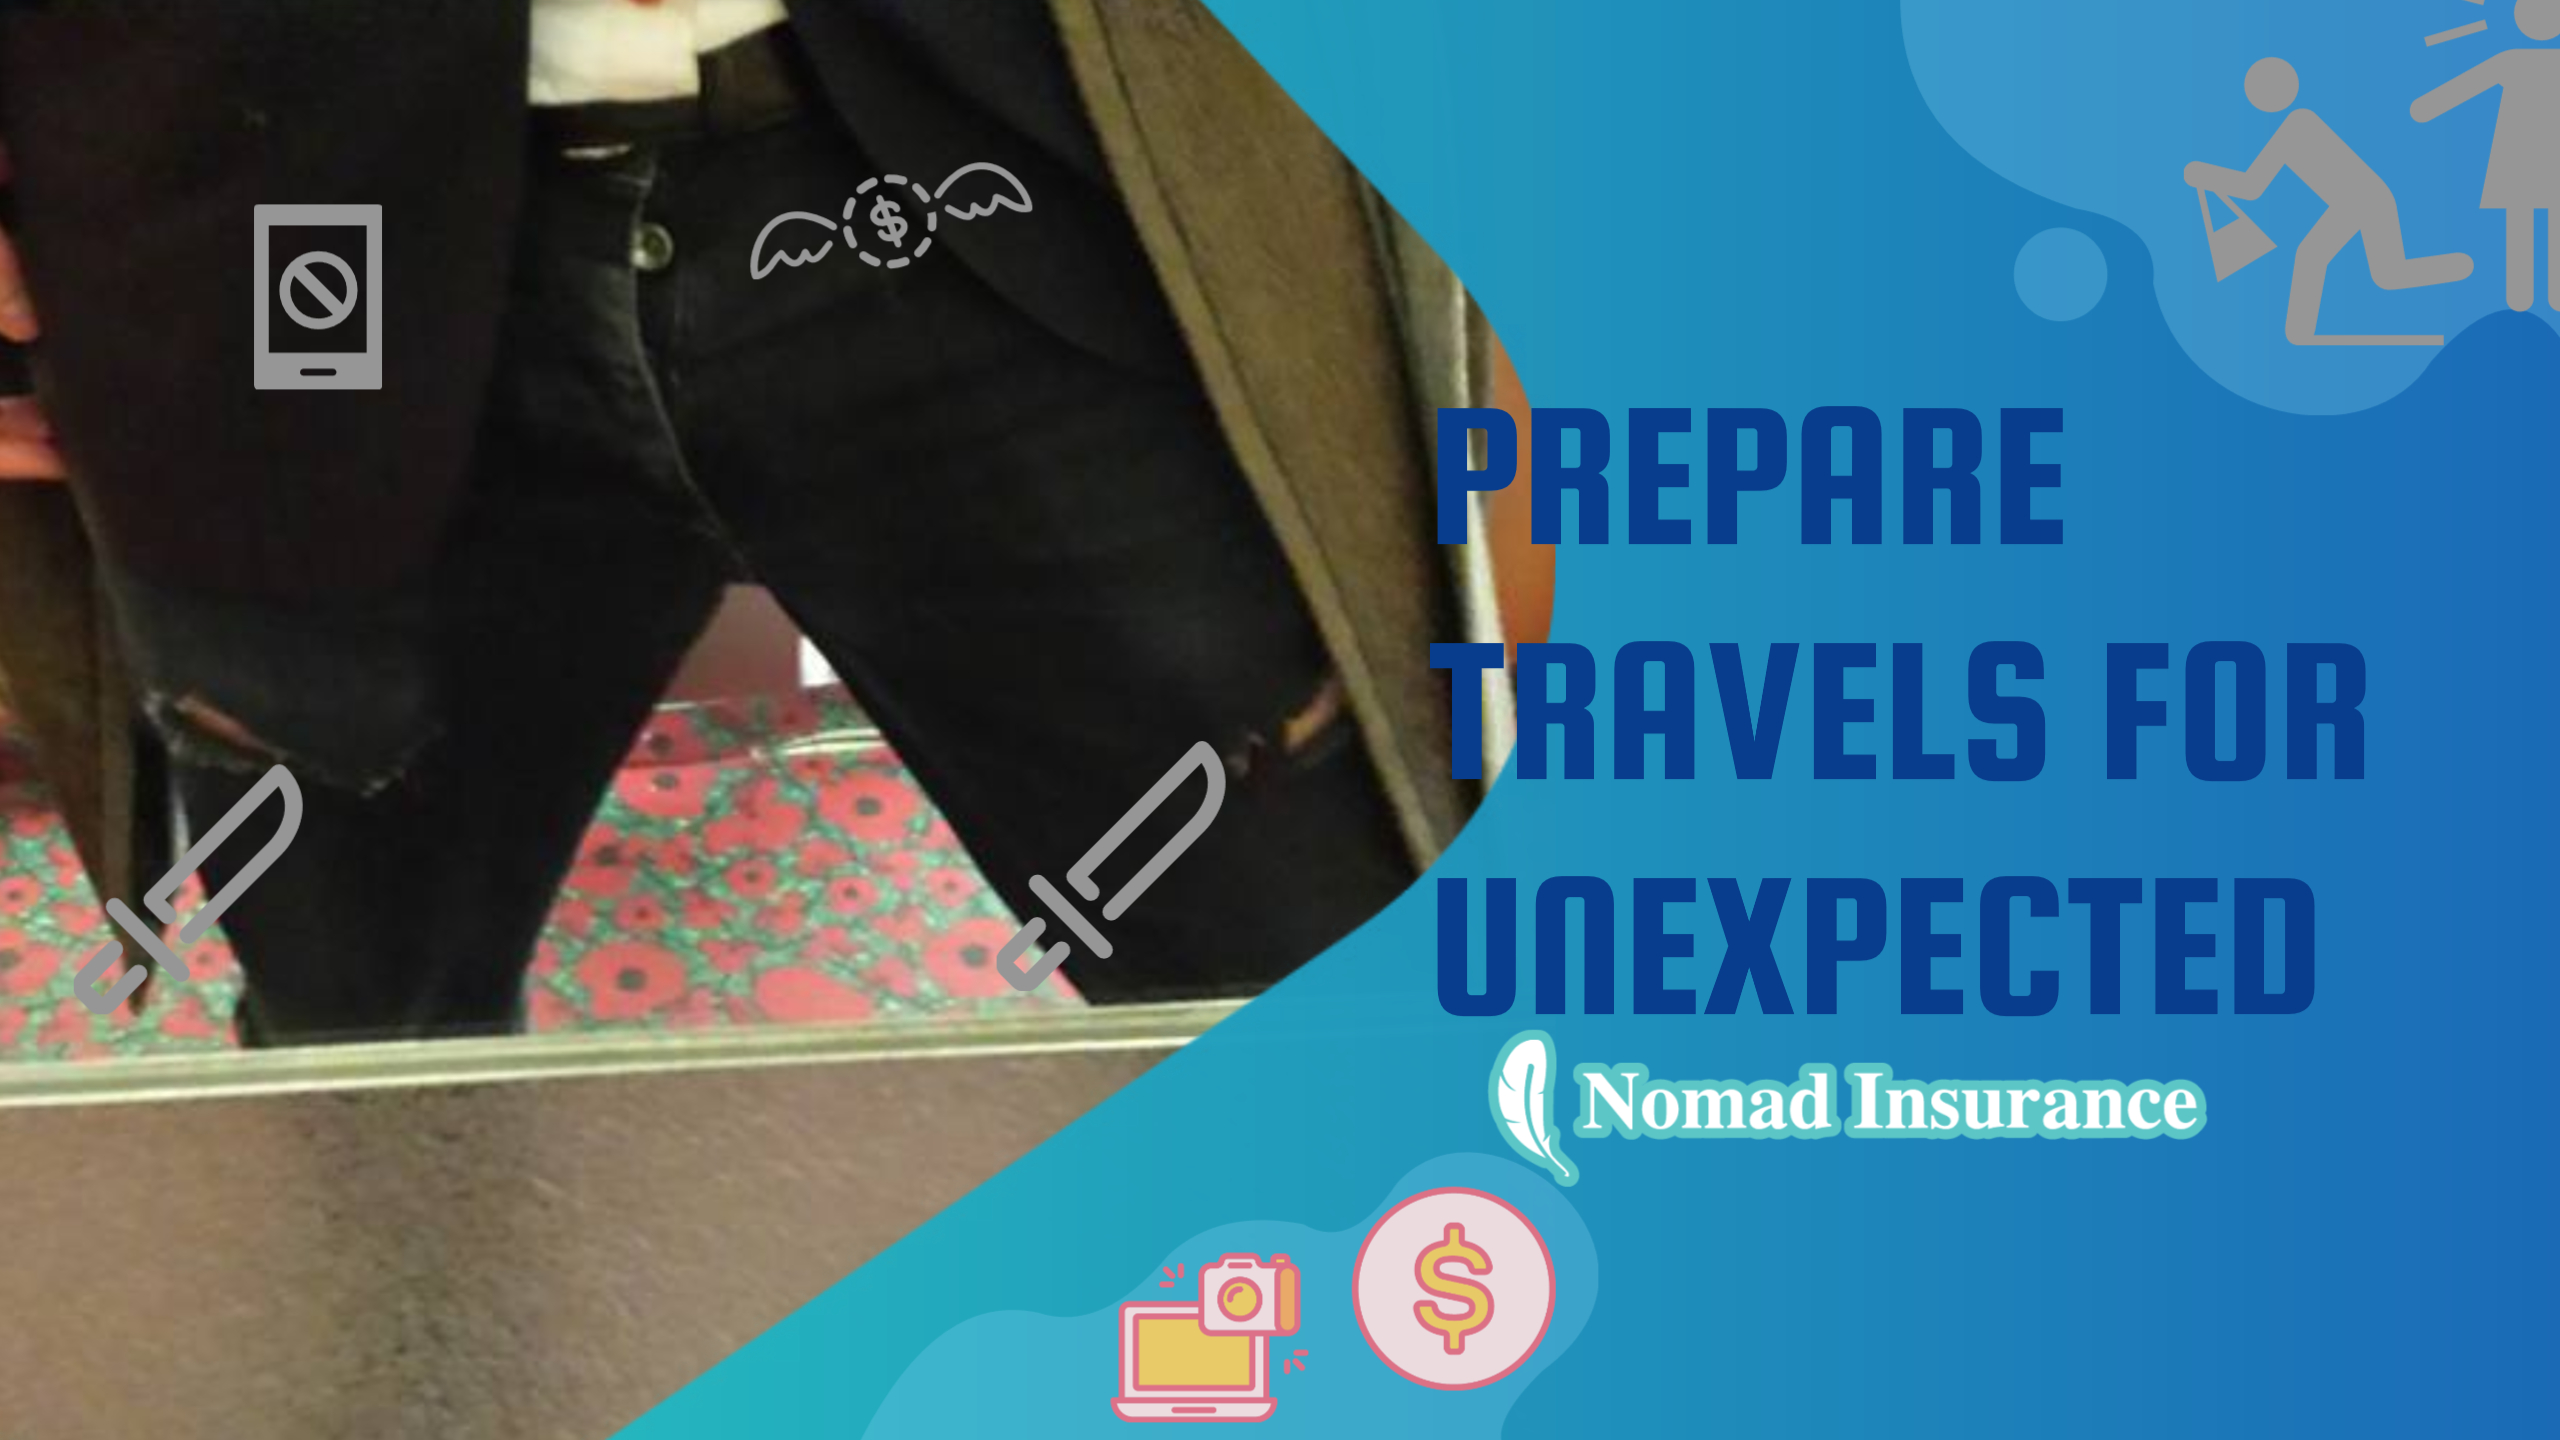 Unfortunate Trips Problems: Experiences And How To Properly Prepare For The Unexpected